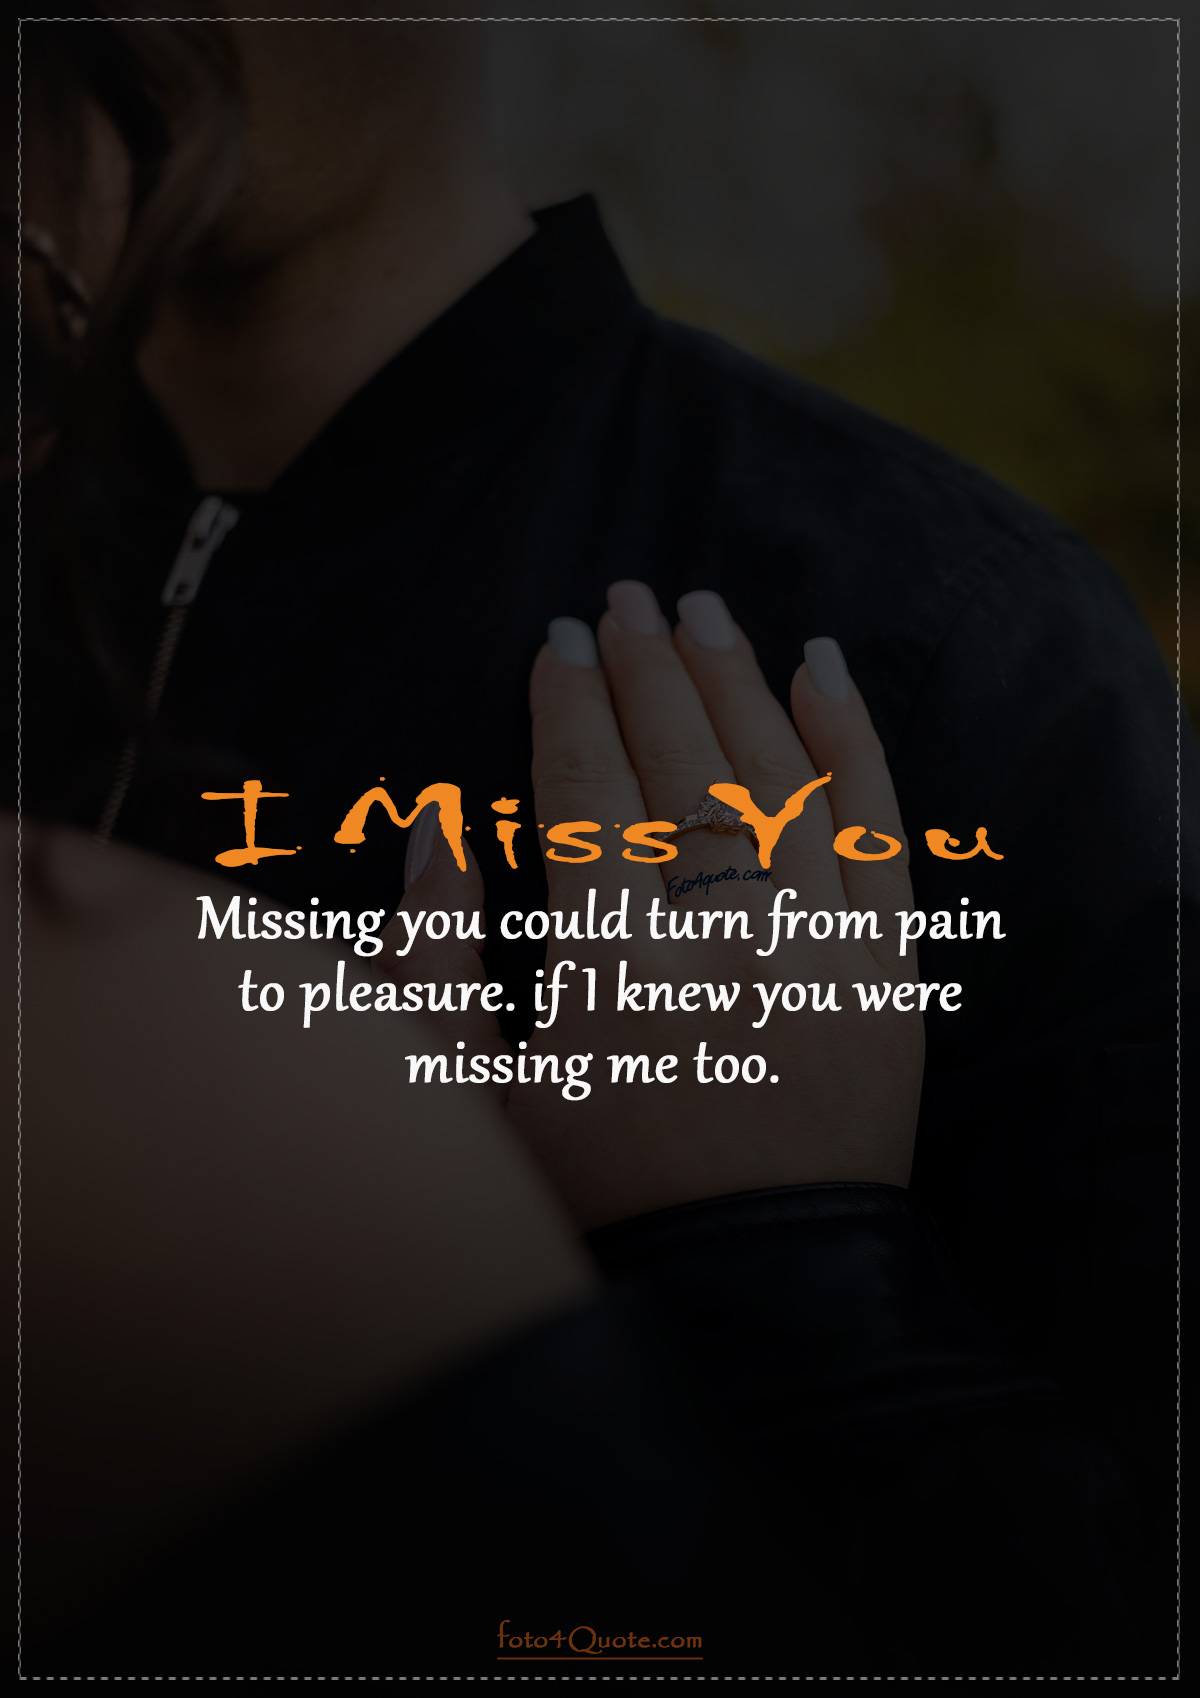 Missing you hurts quotes and images with image for couple holding hands - Missing you could turn from pain to pleasure, if I knew you were missing me too.